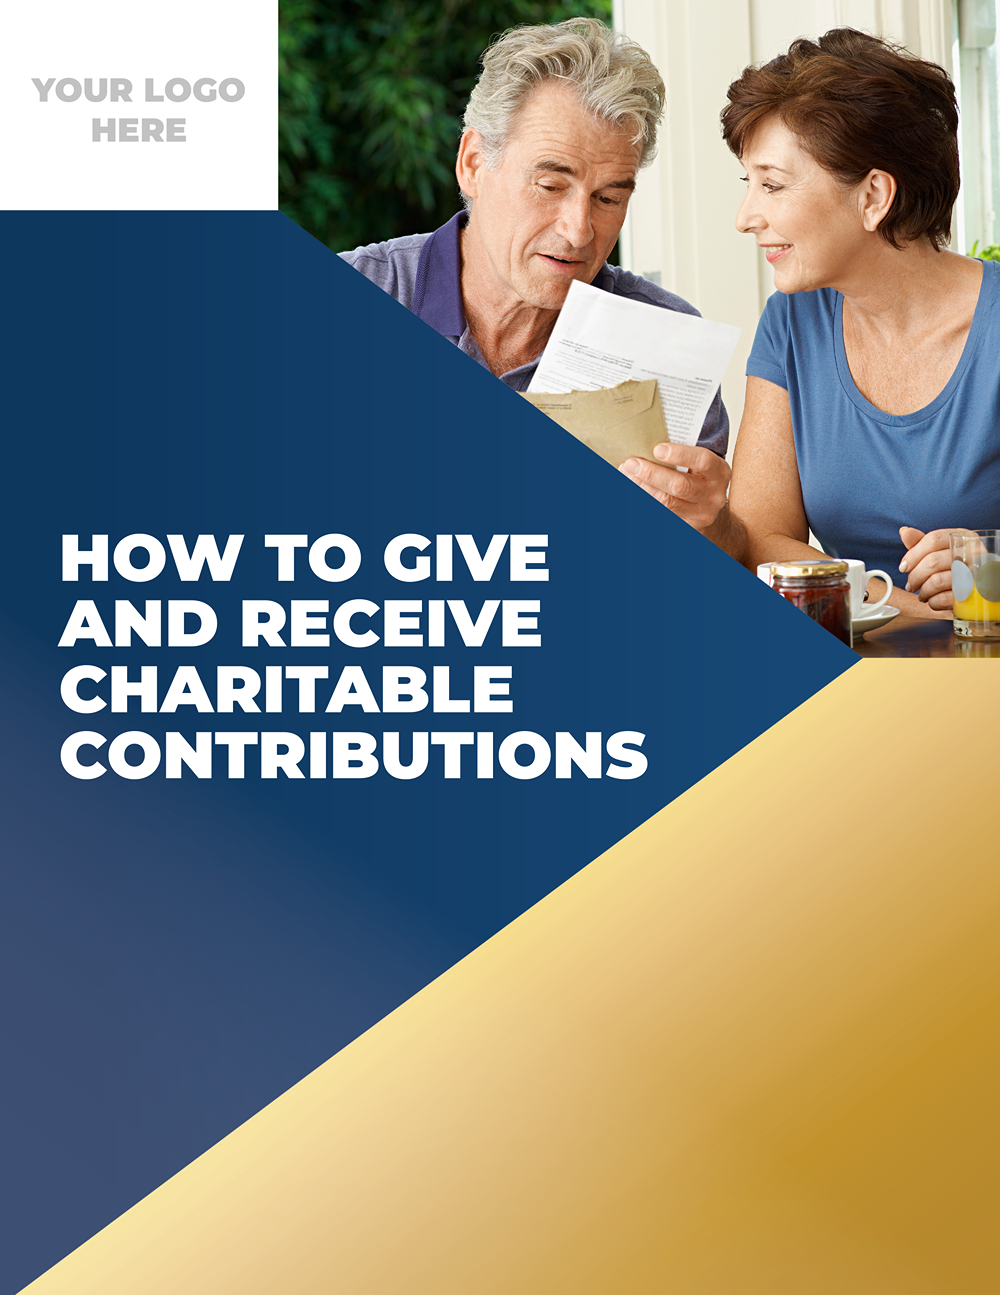 How to Give and Receive Charitable Contributions